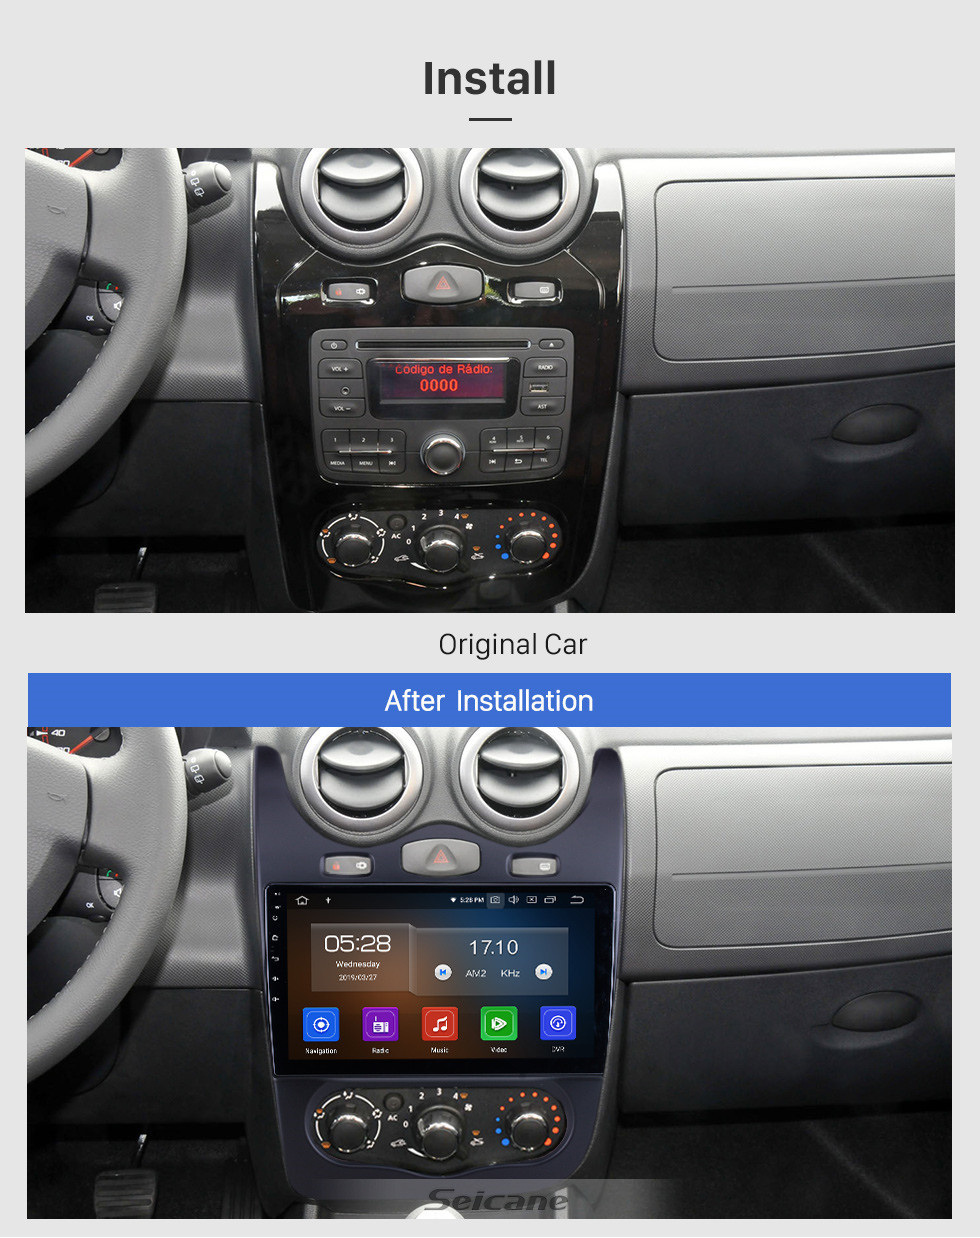 Seicane 10.1 inch For 2014 Renault Sandero Radio Android 11.0 GPS Navigation System Bluetooth HD Touchscreen Carplay support OBD2